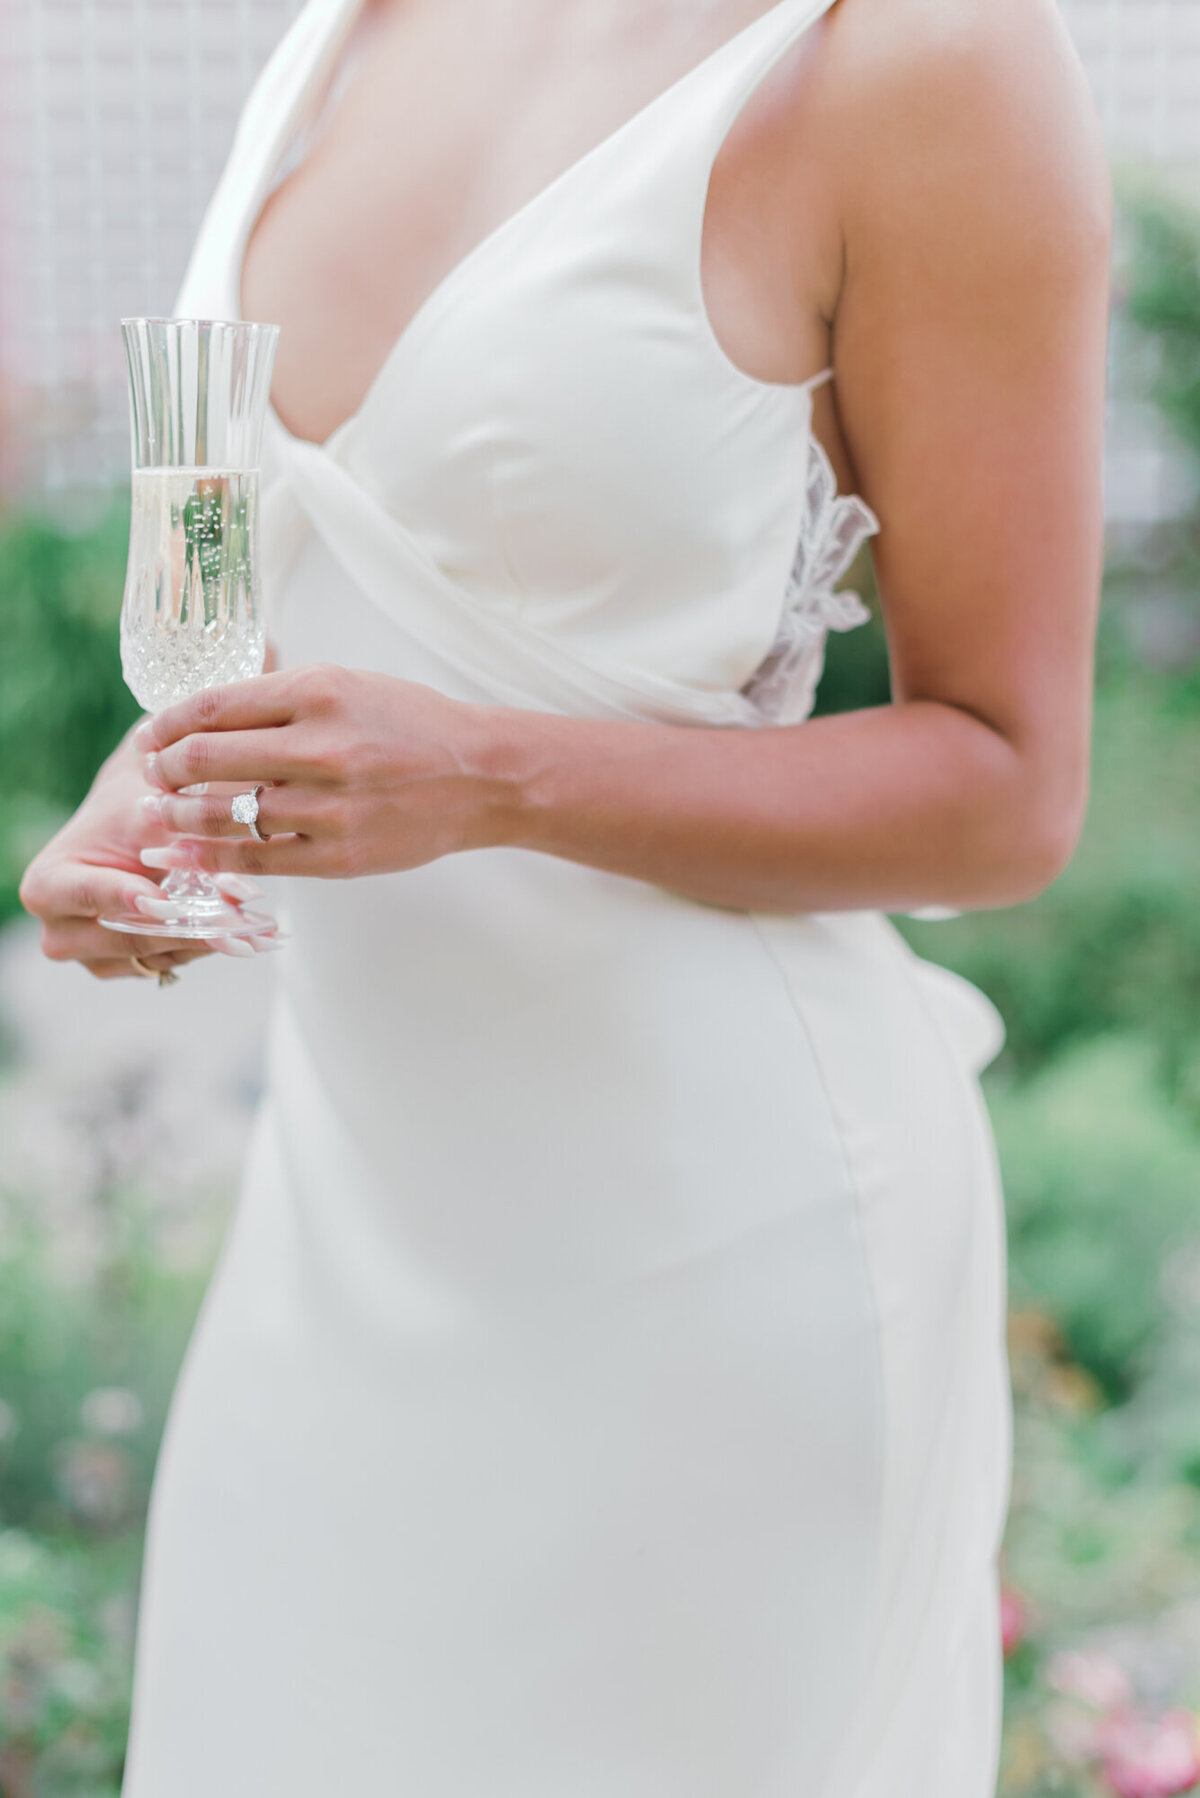 Rebekah Brontë Designs - High-End Wedding Designer. Curated & Meaningful Wedding Design & Management. Modern Fine Art Calgary Wedding Design at The Deane House, florals by Flower Artistry, photo by Kaity Body Photography